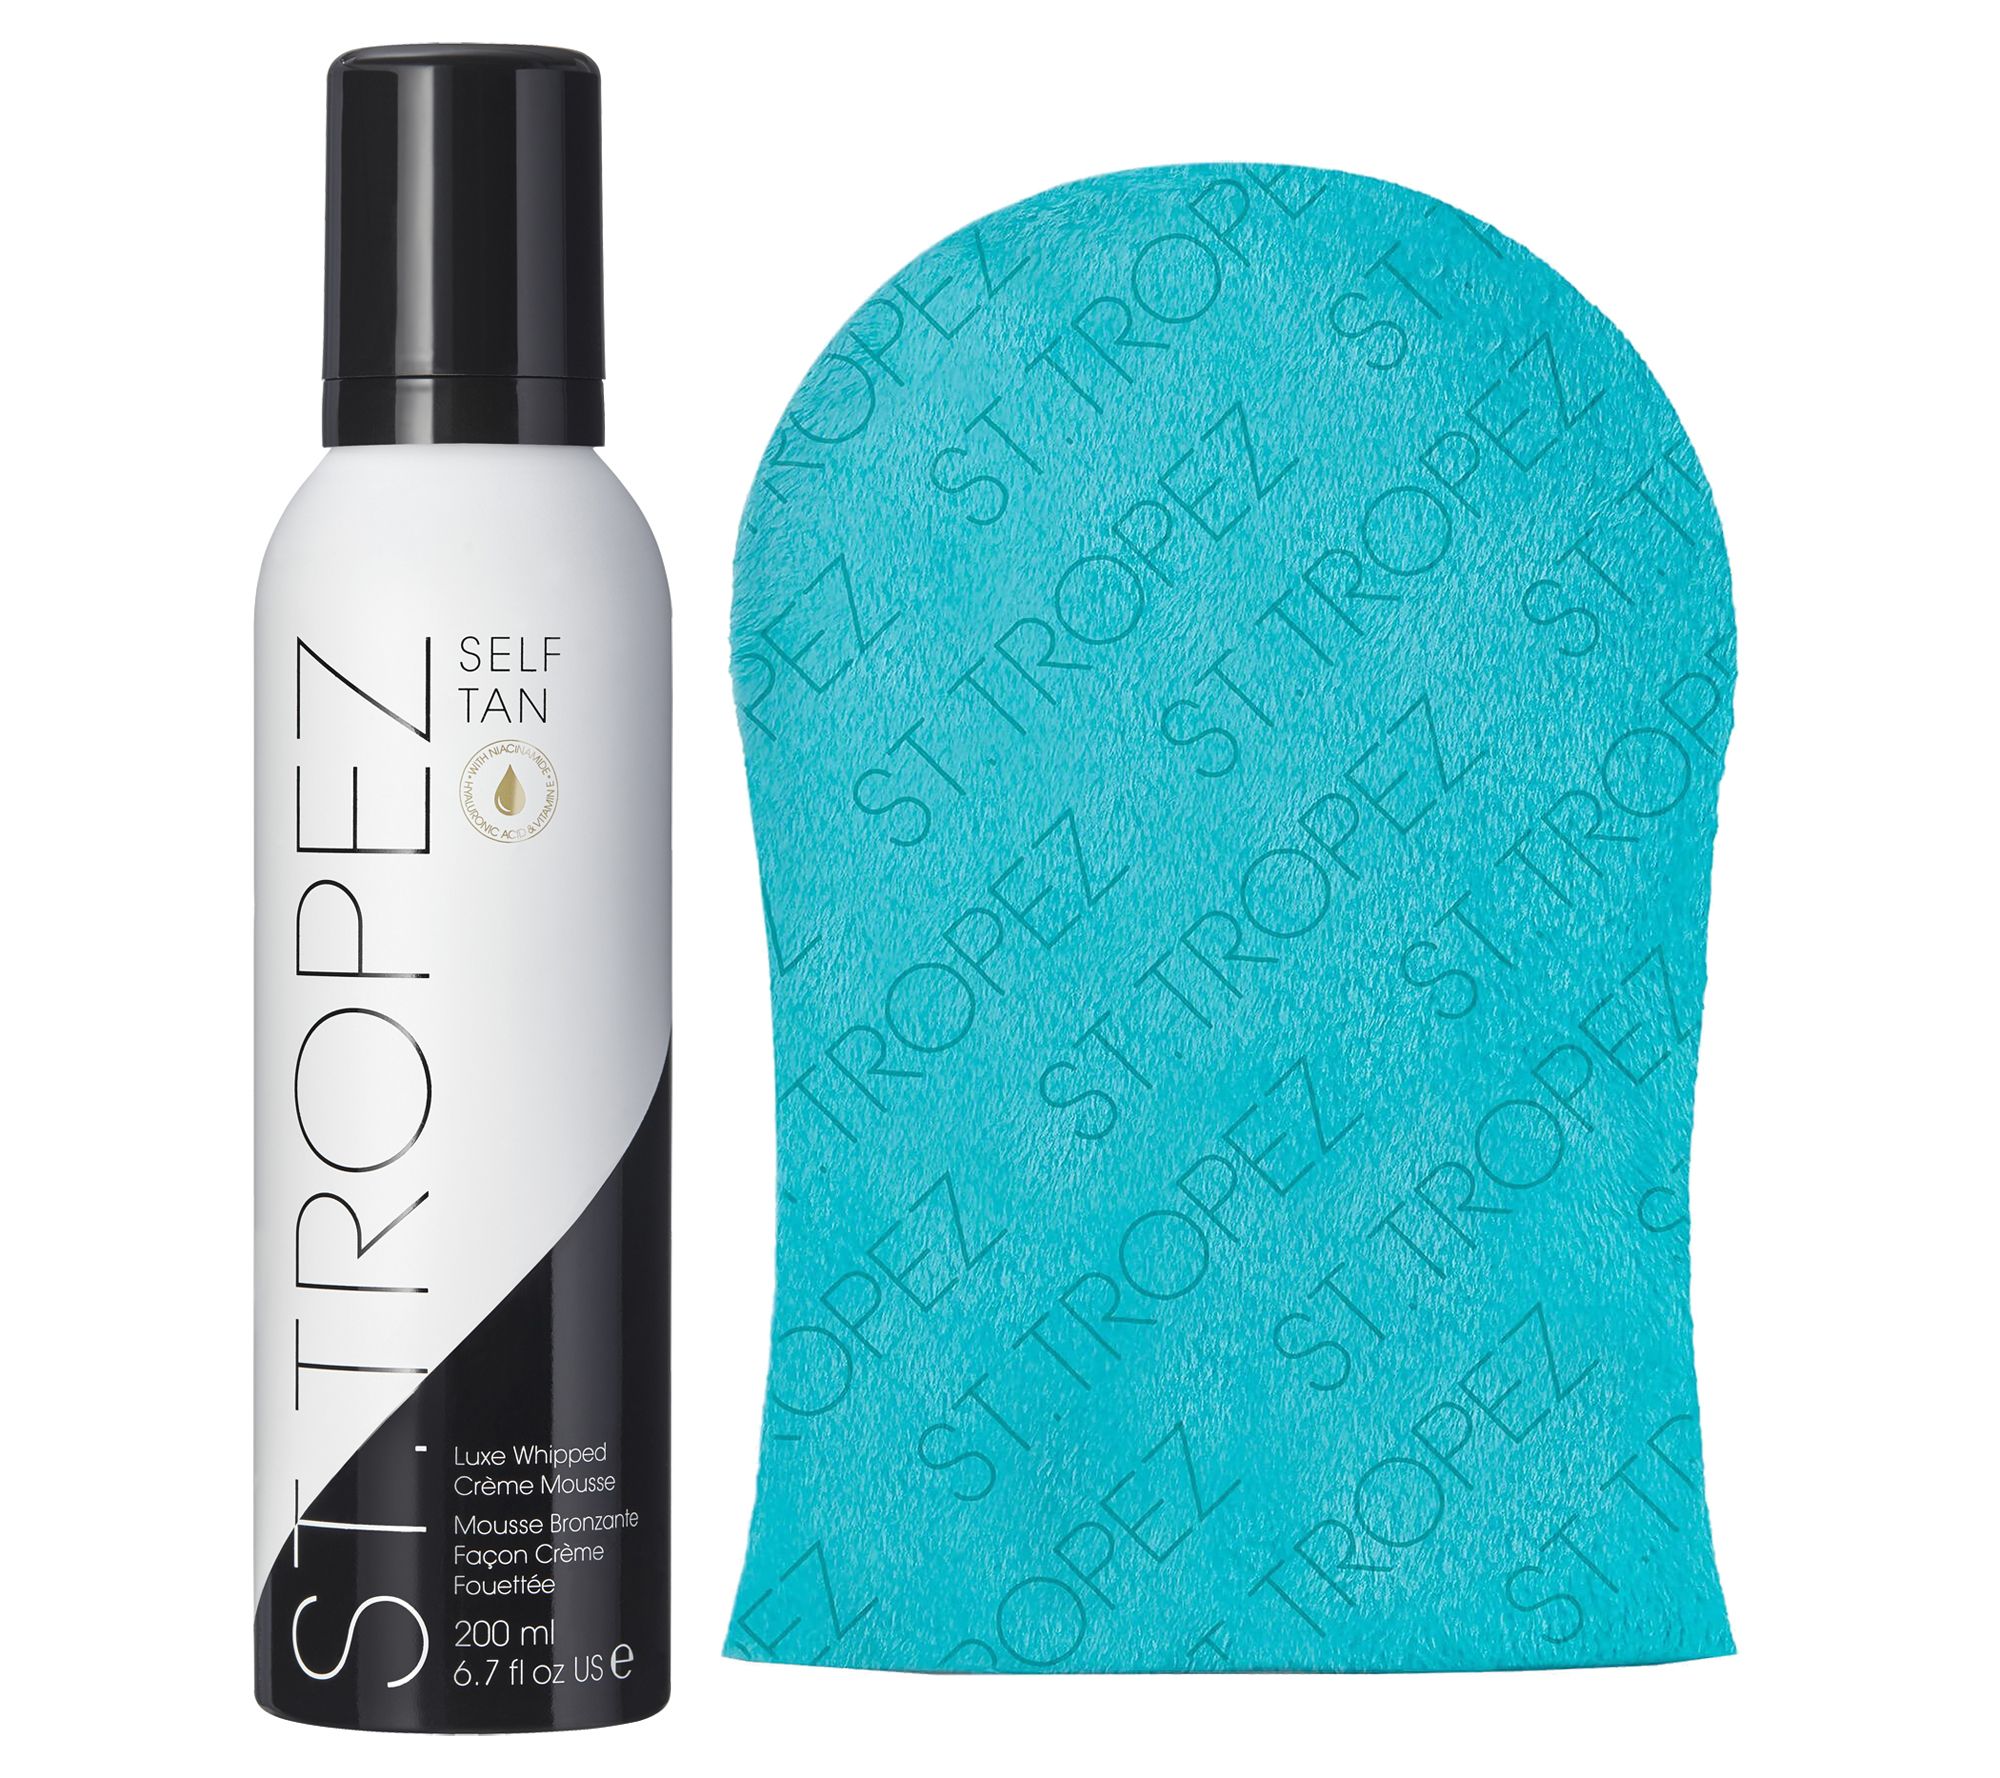 St. Tropez Whipped Tan Self with Creme Mousse Luxe Mitt